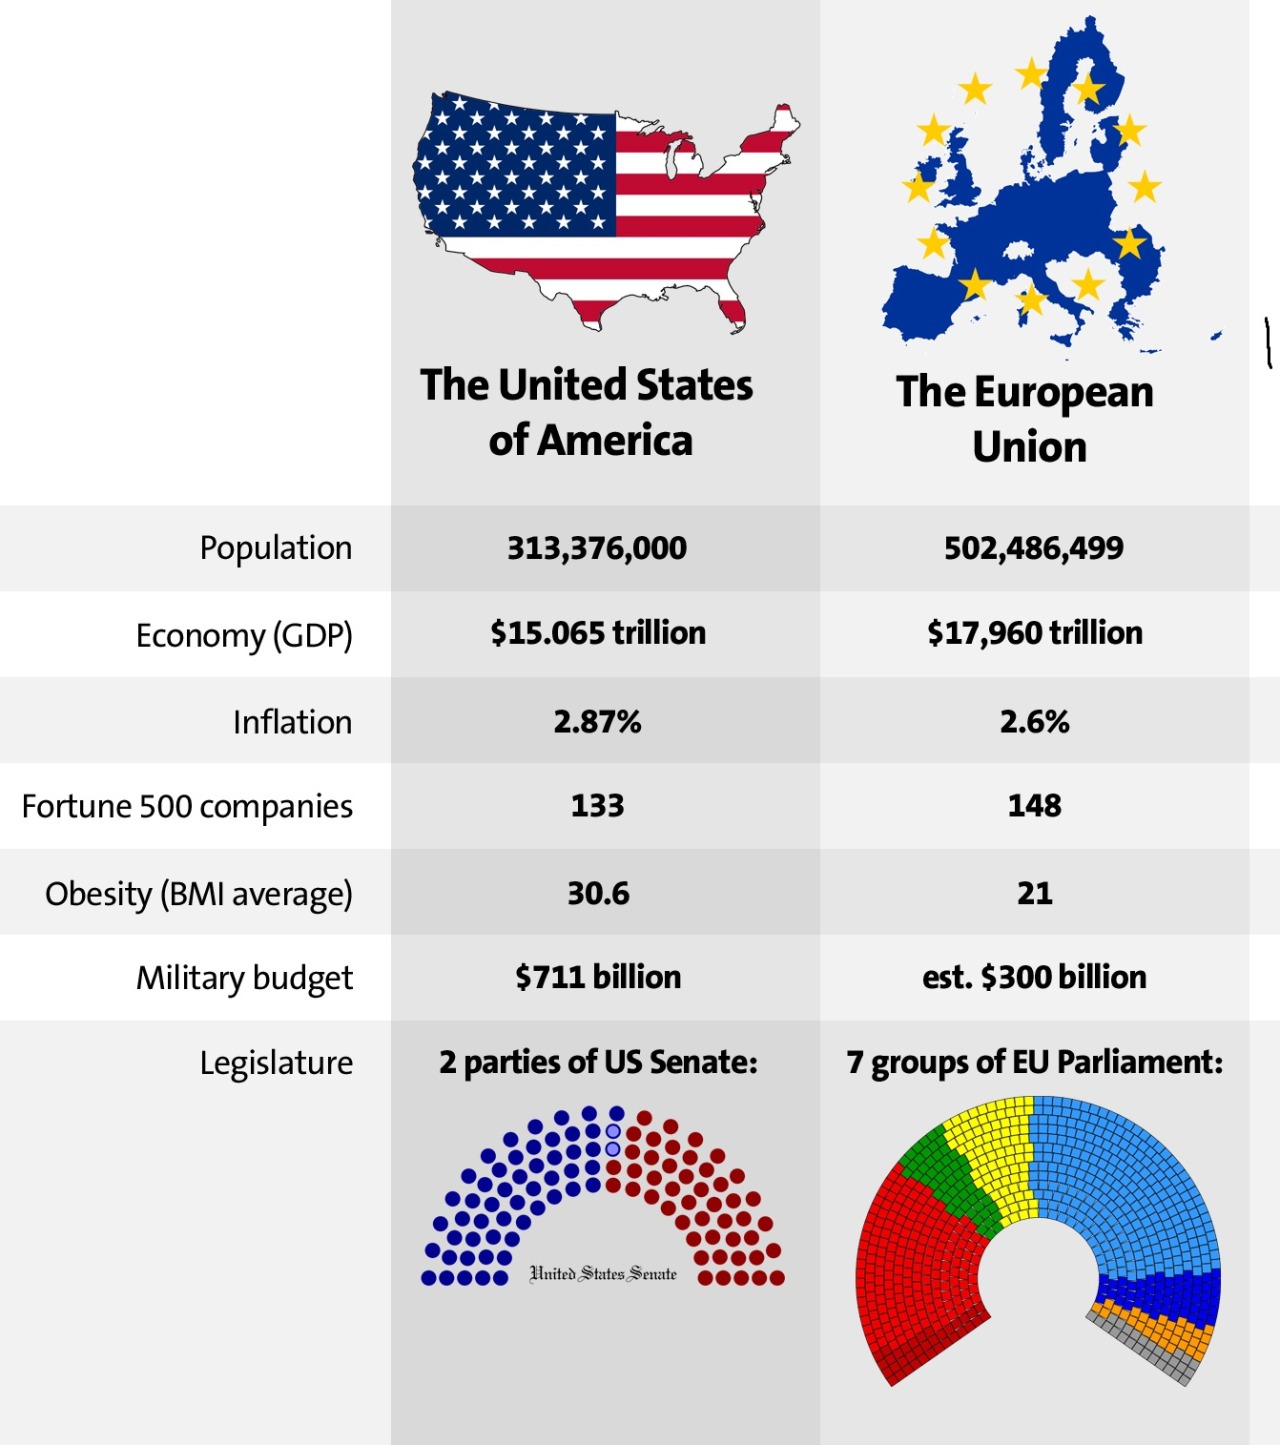 justbmarks:
“ Comparing the European Union and the United States
”